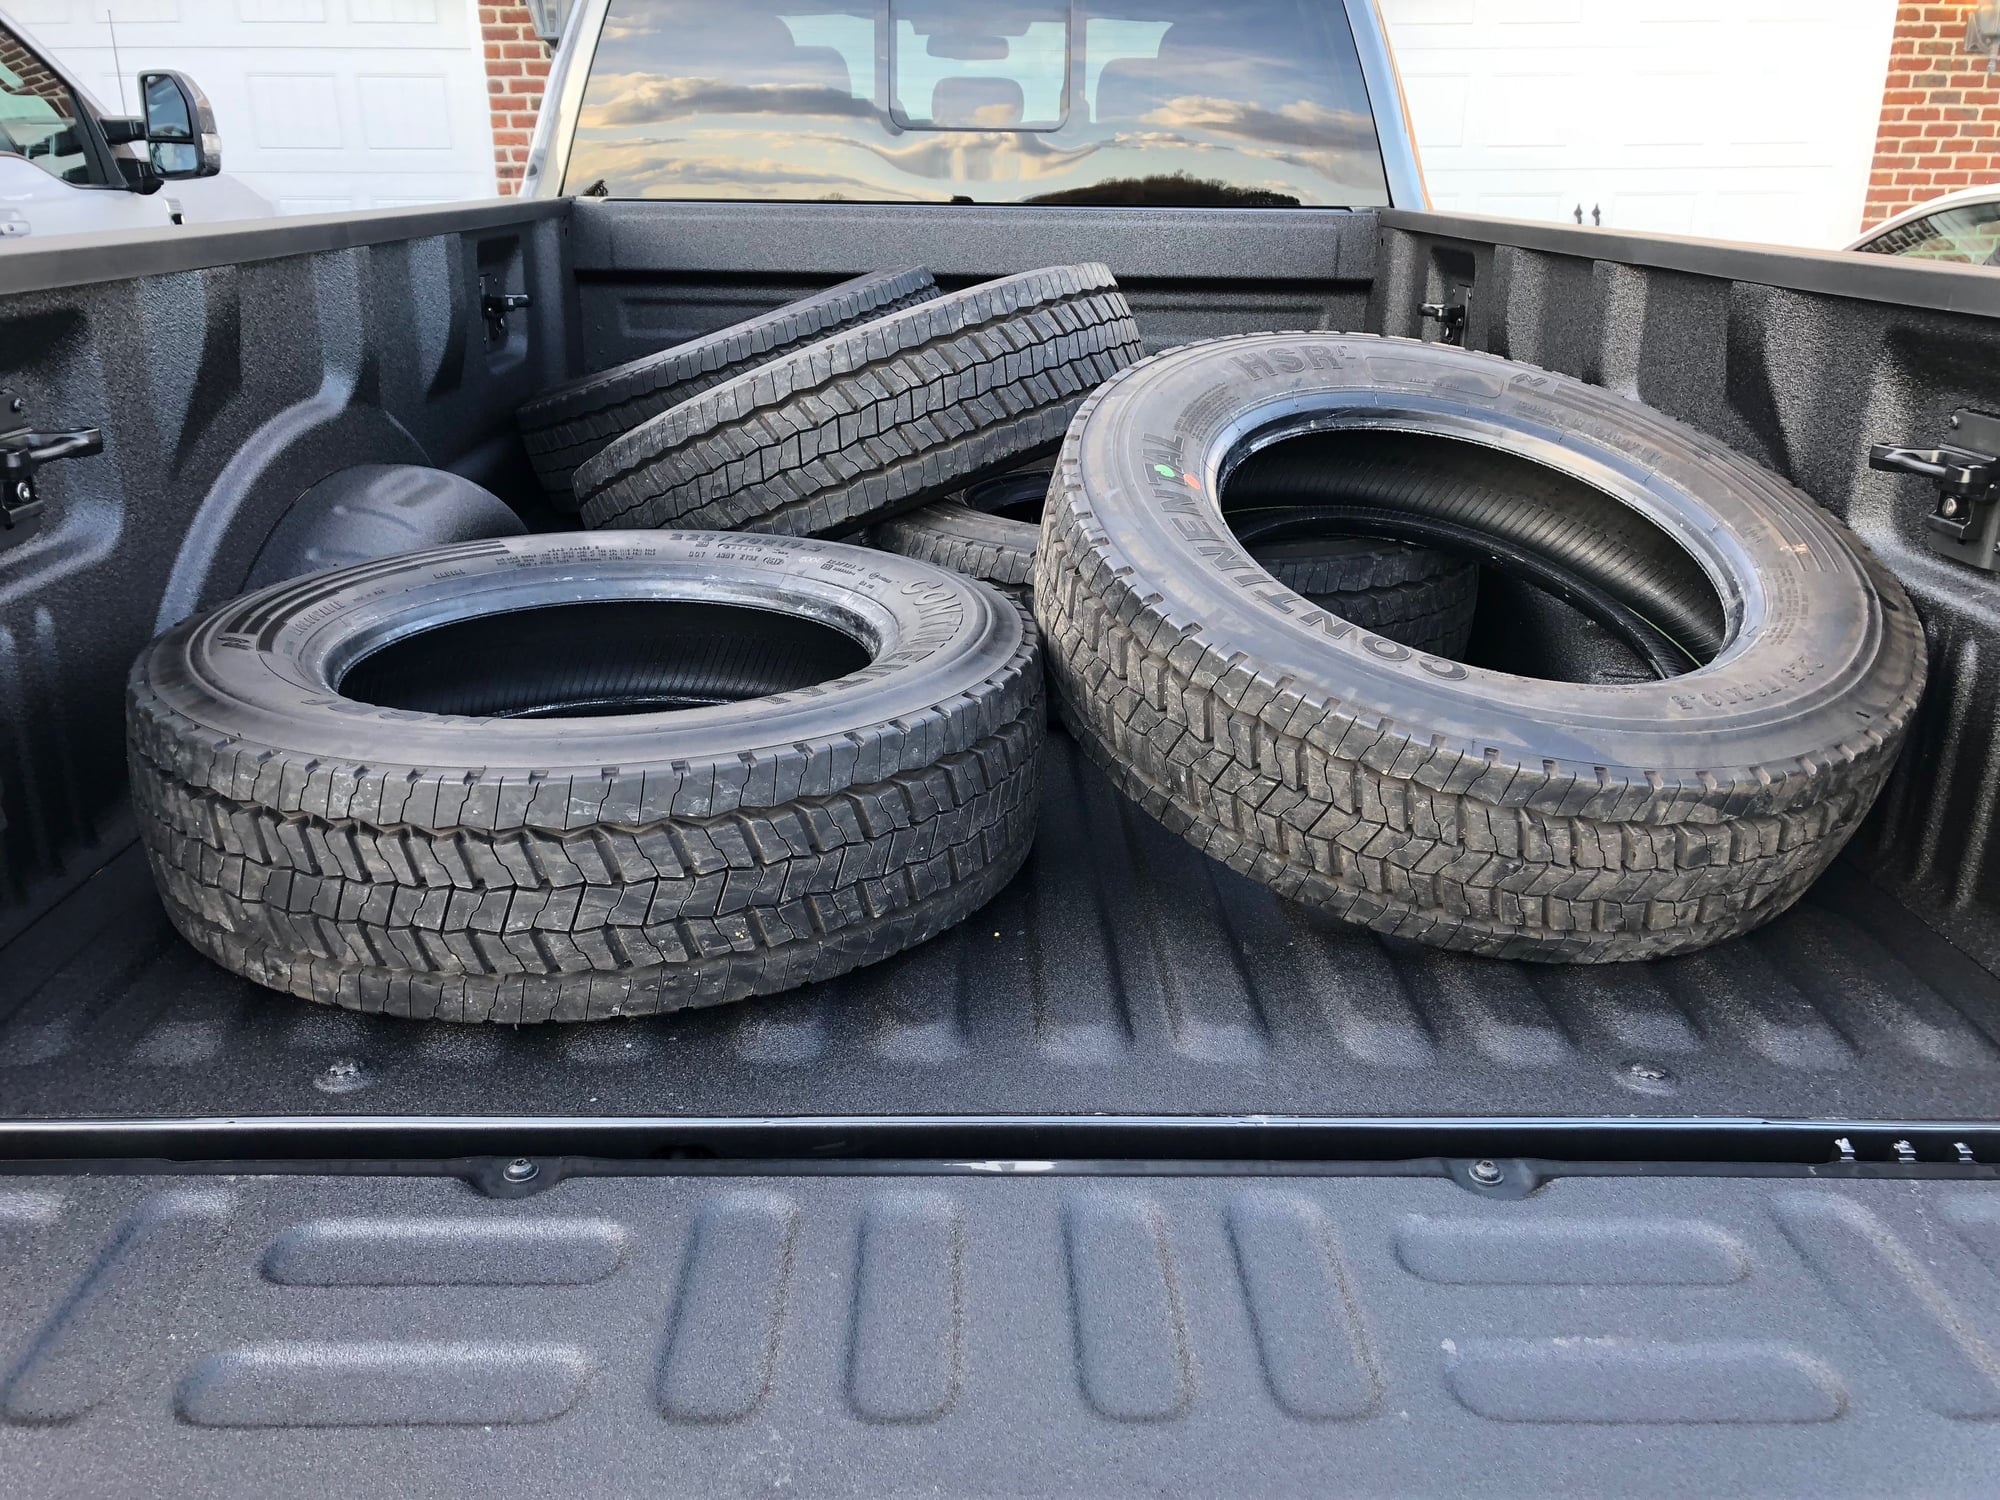 Wheels and Tires/Axles - 6 Continental HSR Tires - Used - All Years Ford F-450 Super Duty - Fallston, MD 21047, United States